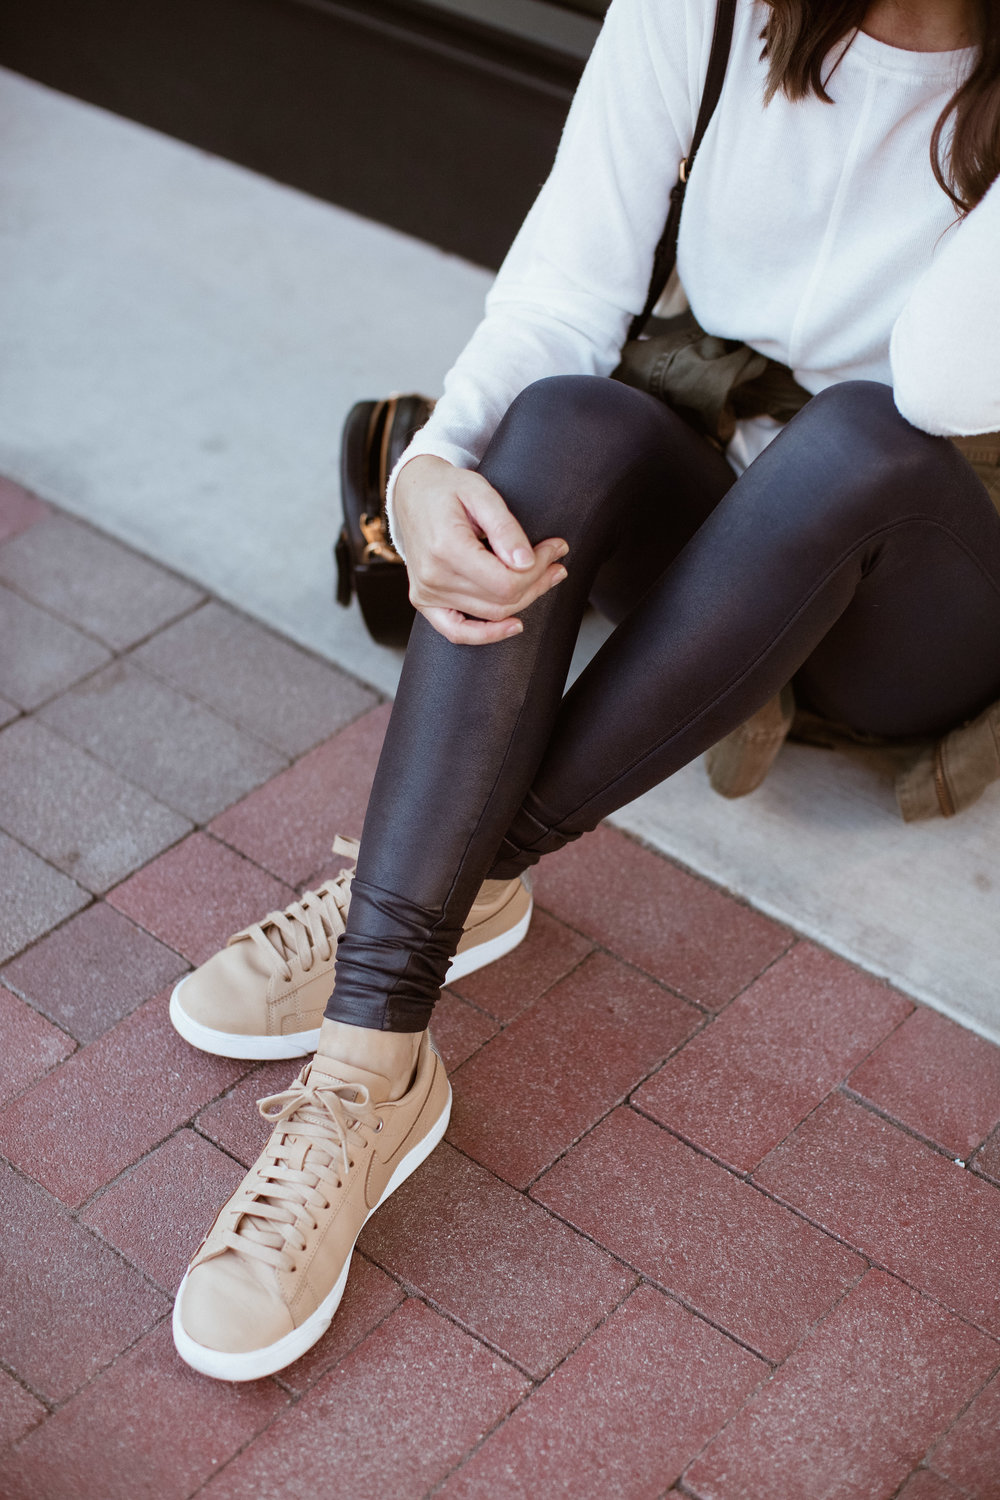 Port by jeg lytter til musik Spanx Faux Leather Leggings and Sneakers — Girl Meets Gold